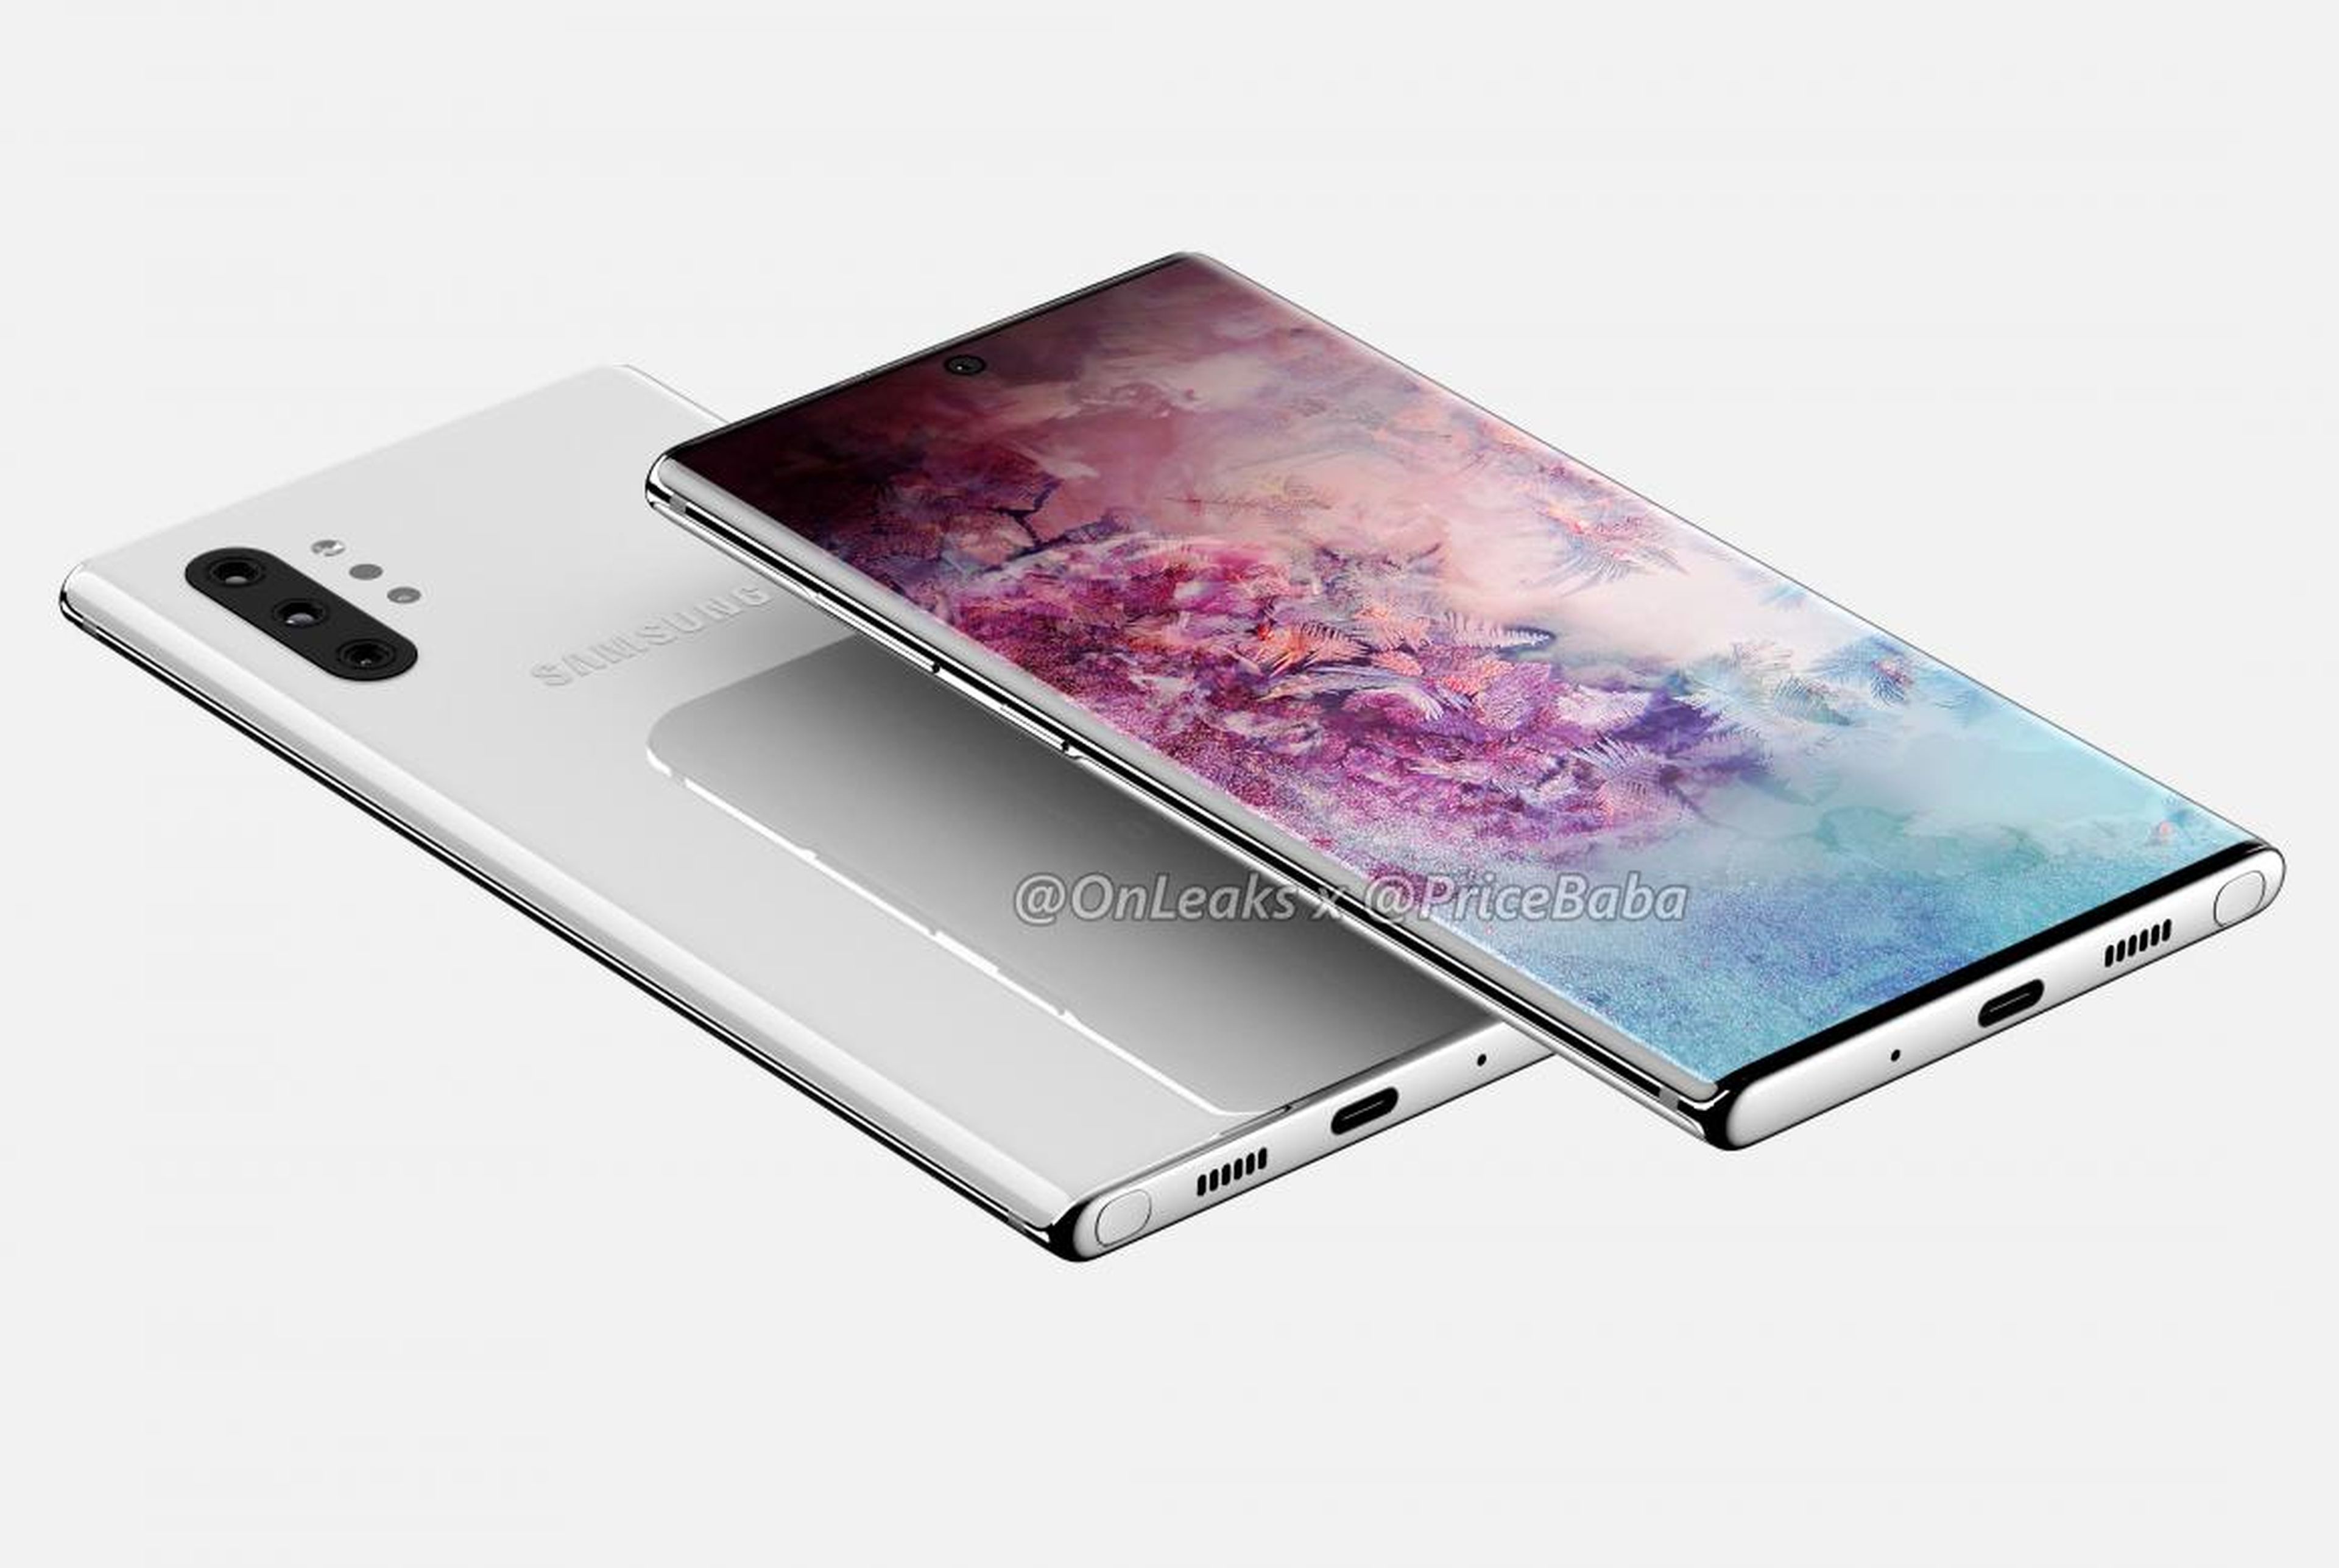 Some reports also say Samsung will release a "Pro" or "Plus" version of the Note 10 that will have a larger 6.8-inch OLED screen, a fourth camera lens, and an even bigger battery. We'll have to wait until August 7 to see whether